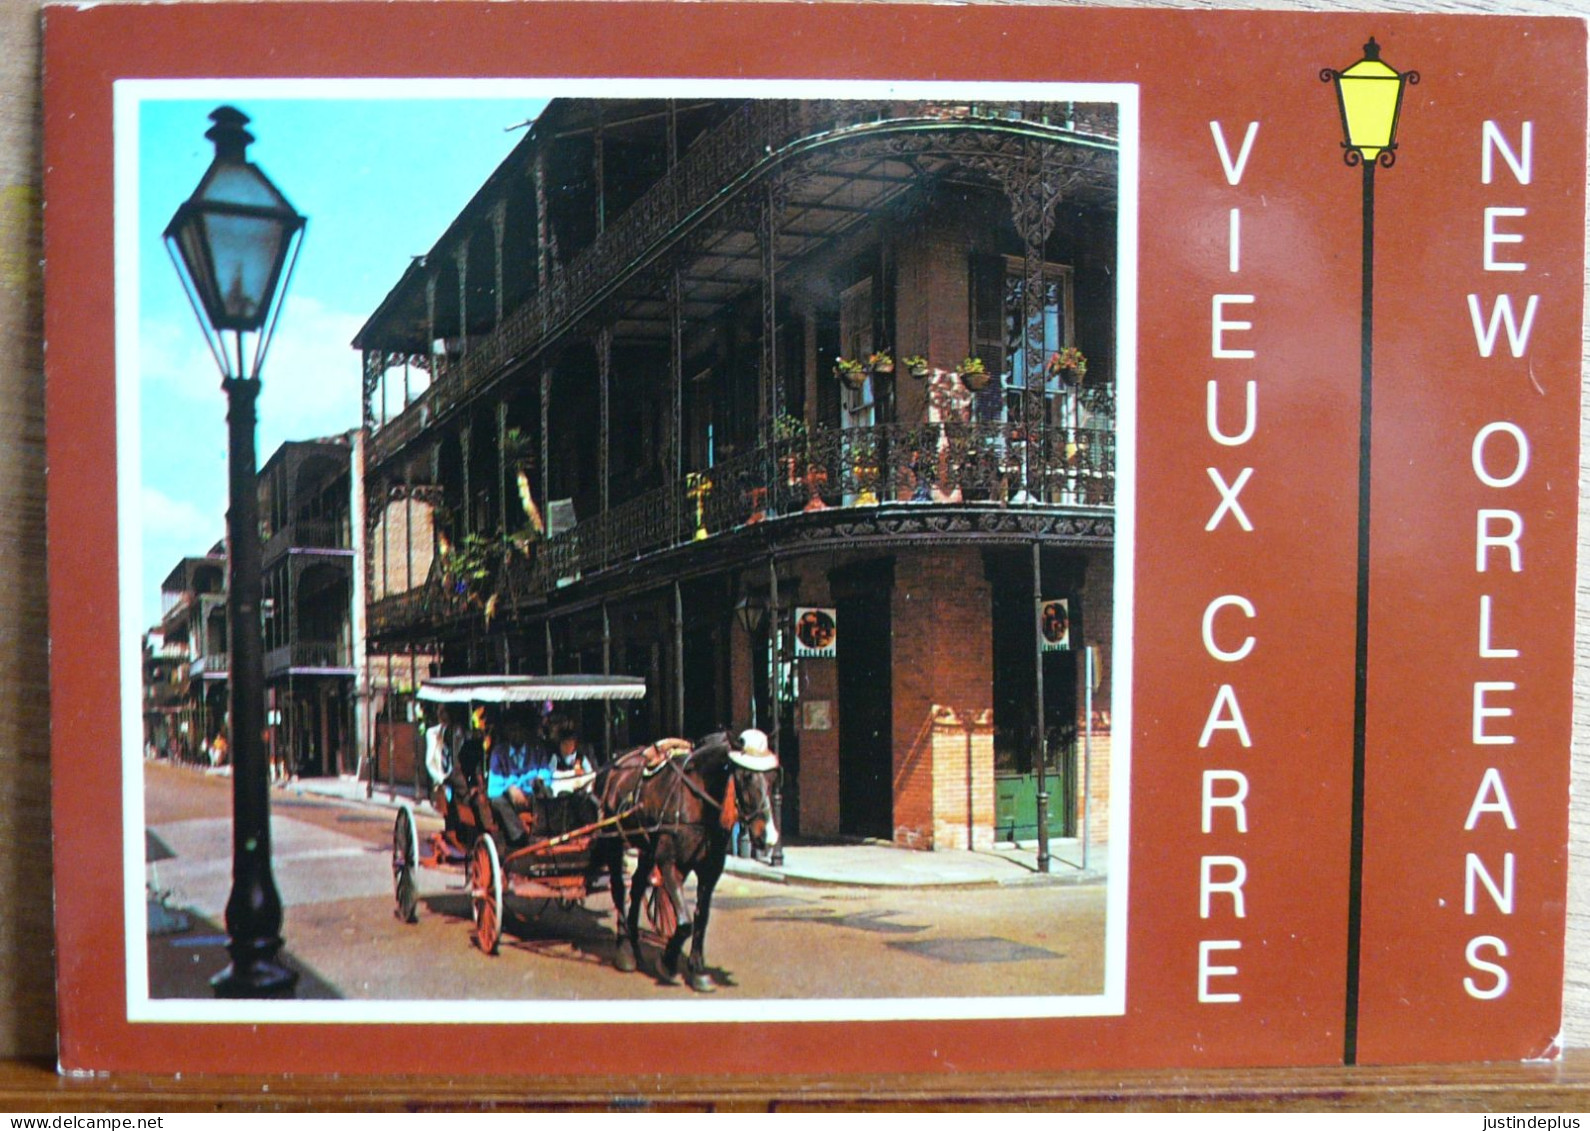 A TYPICAL NEW ORLEANS SCENE VIEUX CARRE - New Orleans